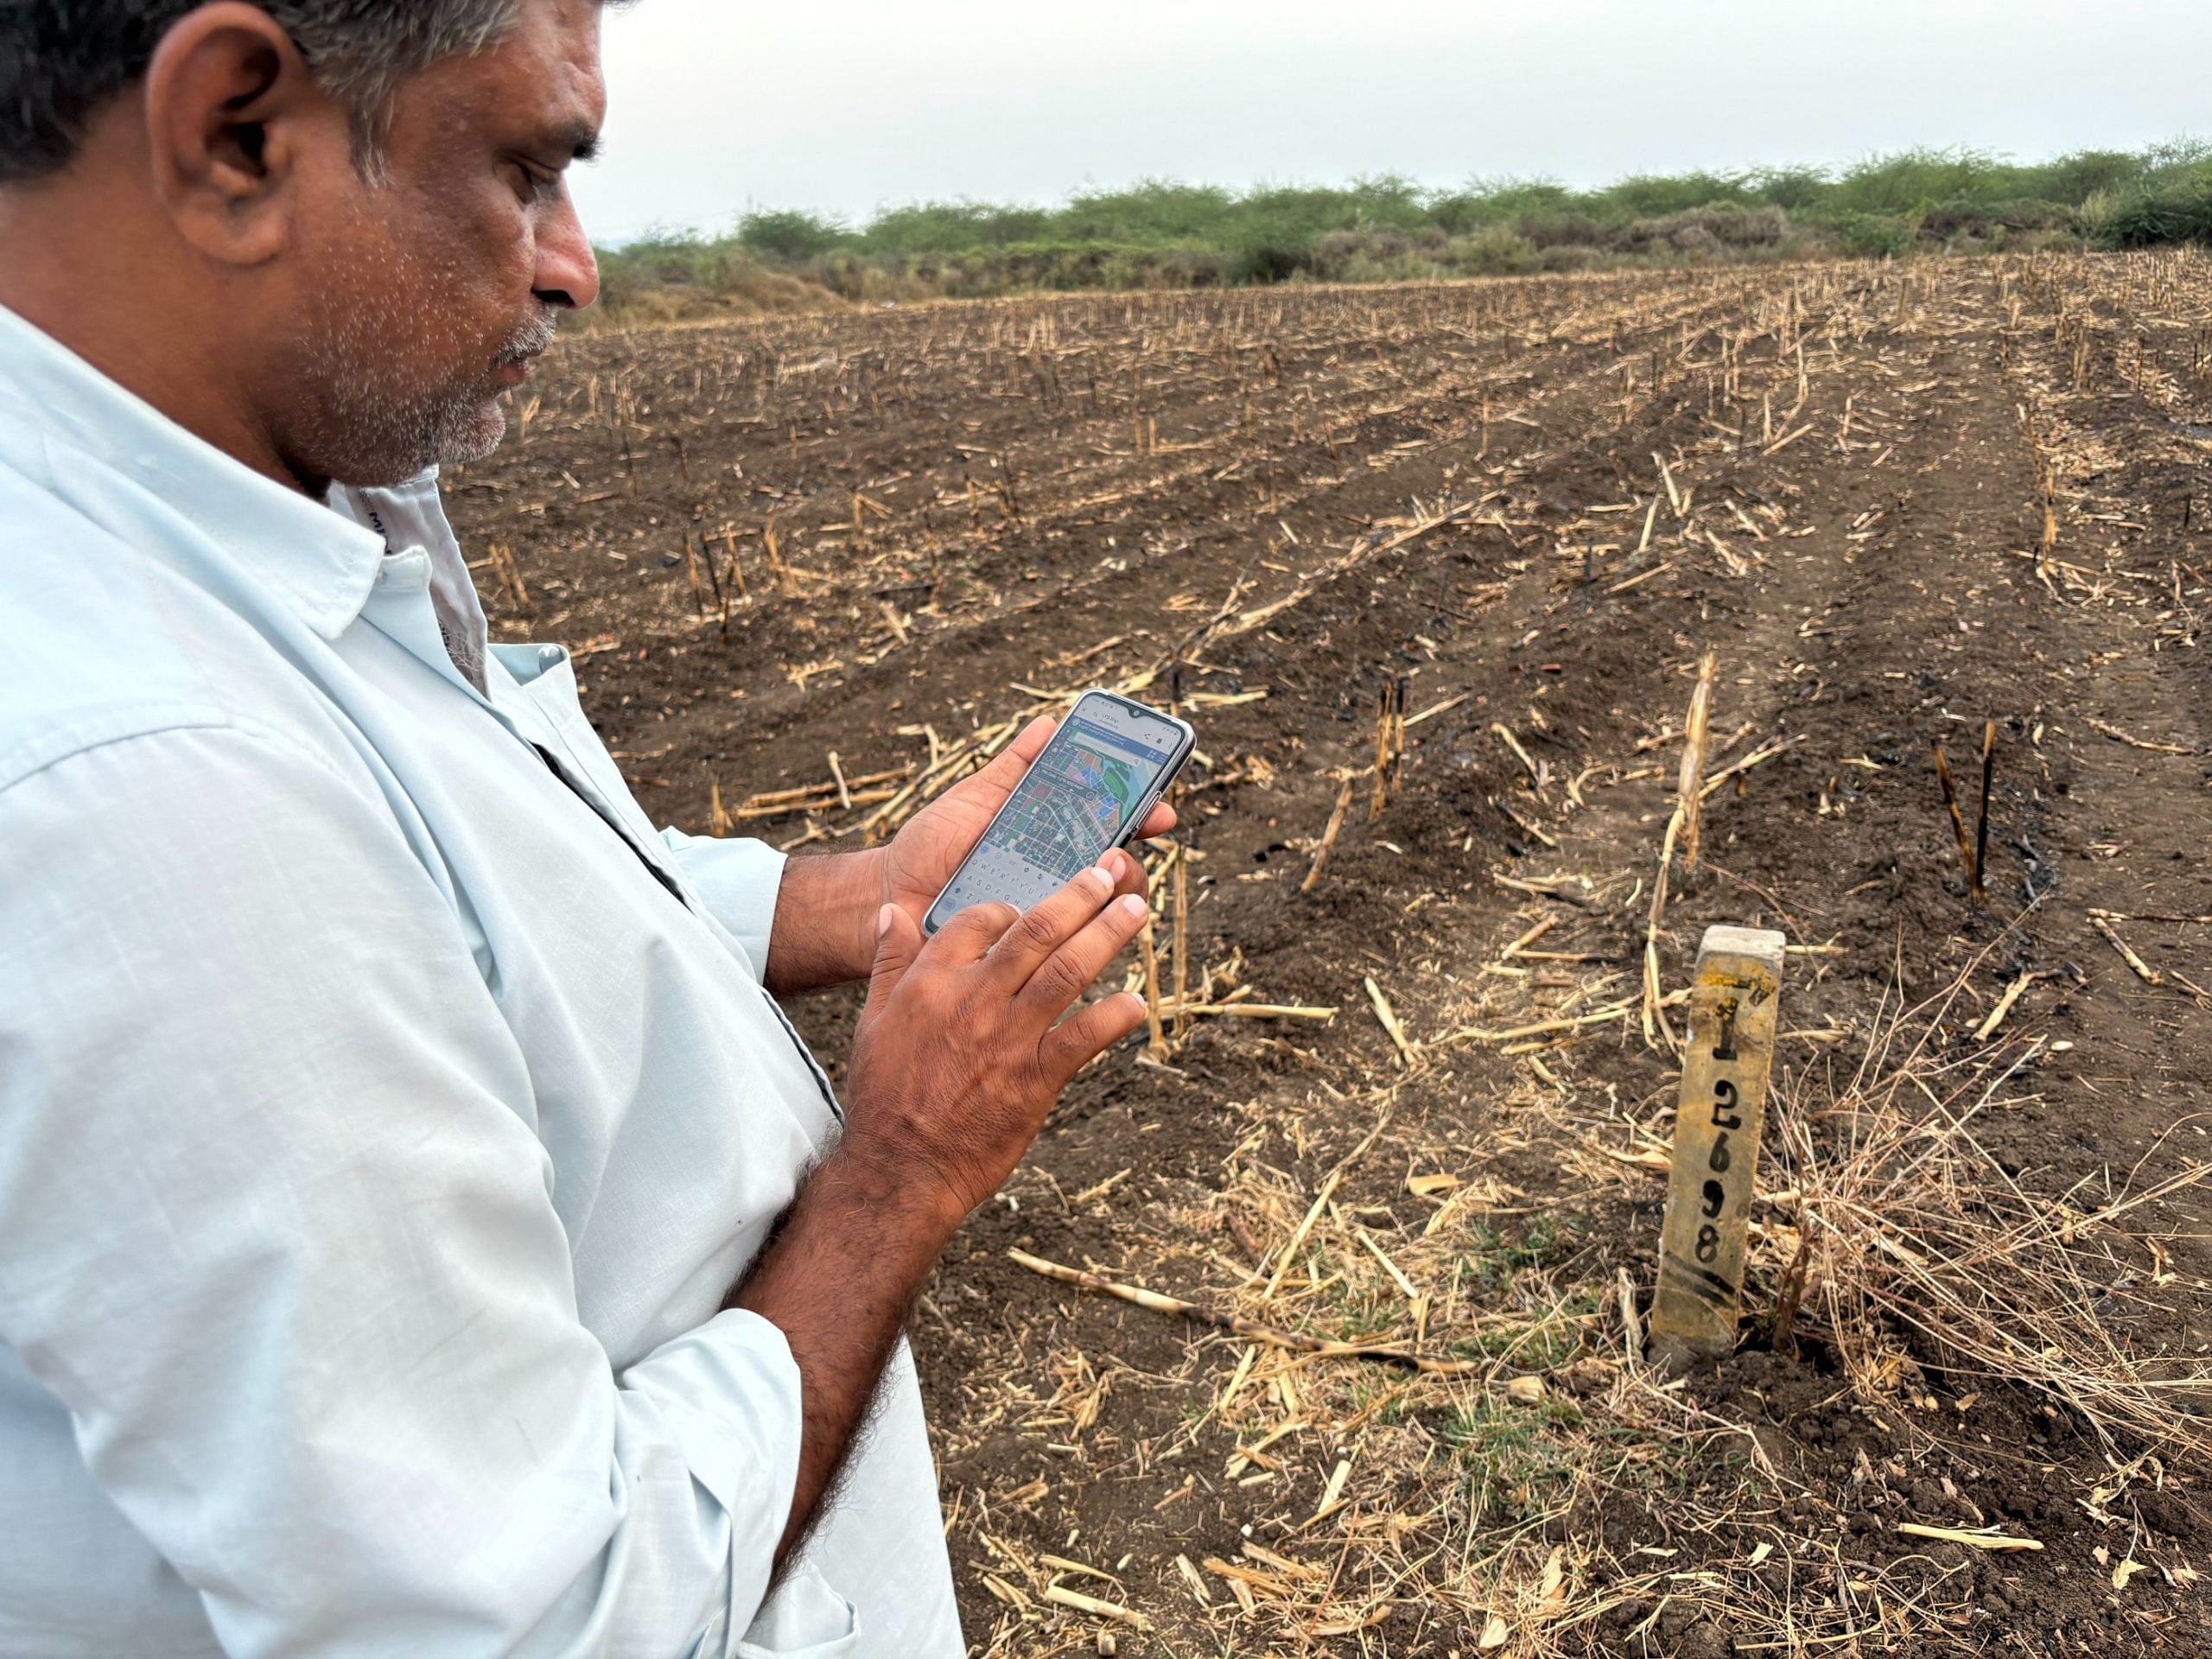 Bhukya Rambabu, a farmer in Amaravati, and his plot of land that was taken over by the former TDP government to build the state's new capital | Vandana Menon | ThePrint